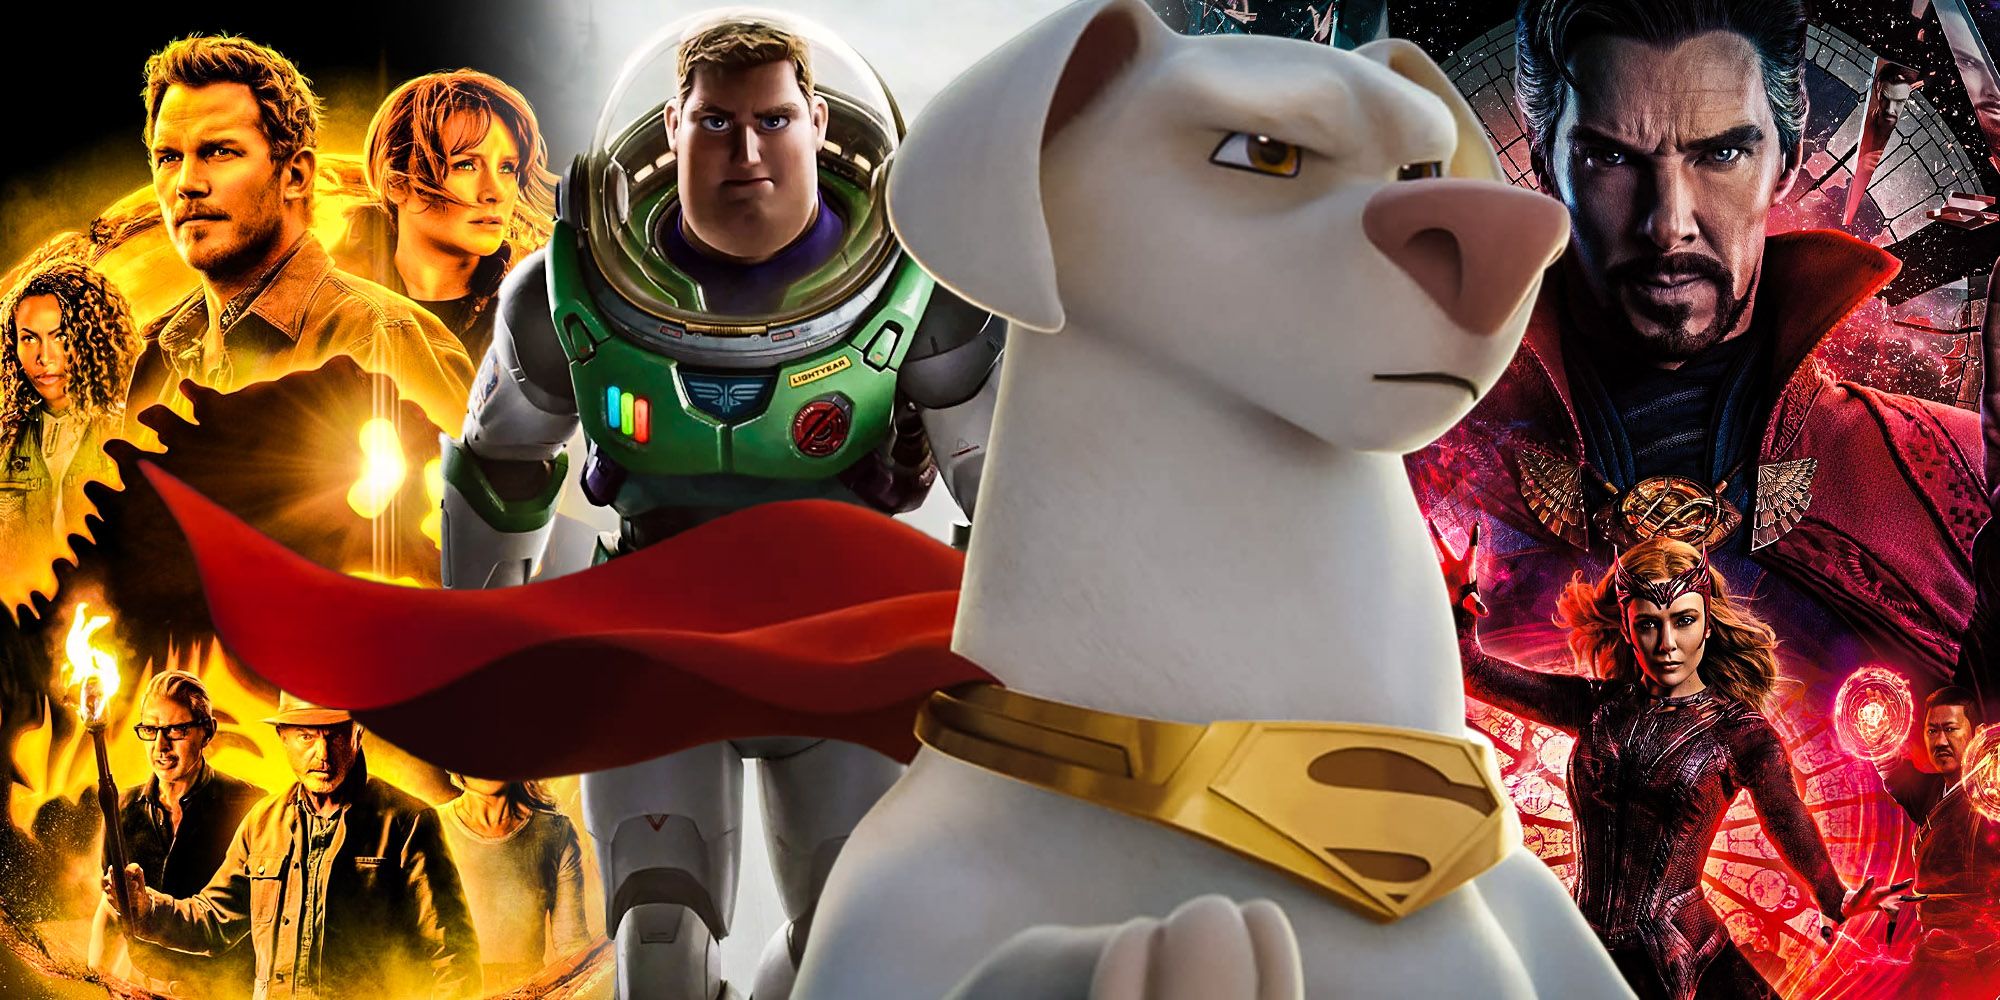 Movies coming out this summer Super pets doctor strange multiverse of madness jurassic world dominion lightyear